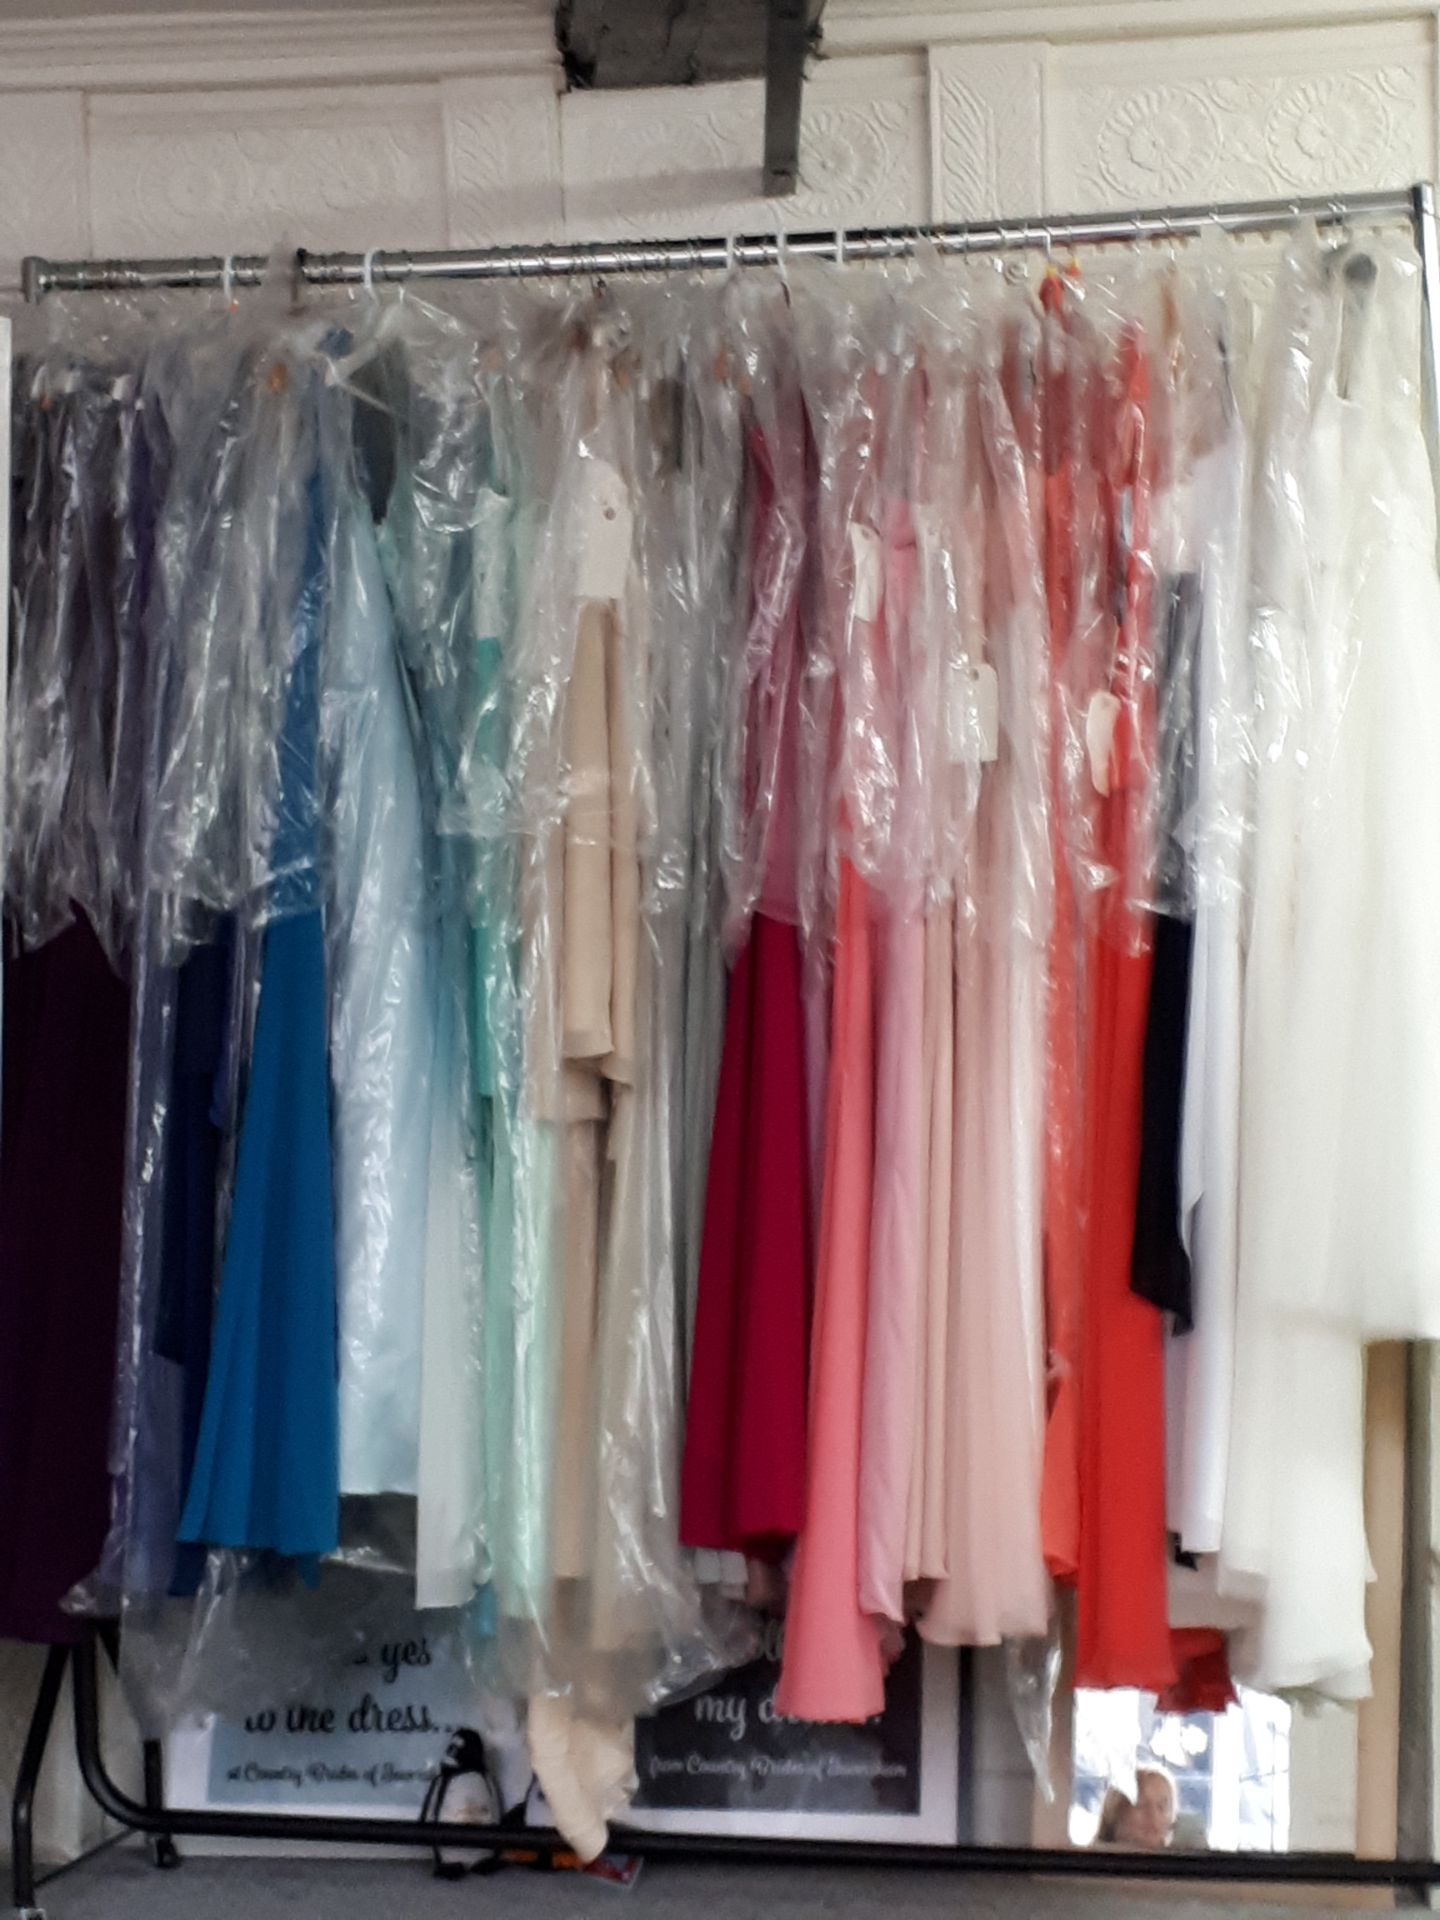 Bulk Lot of Dresses Mixed Sizes and Colours. All From Alfred Angelo x 50 Dresses